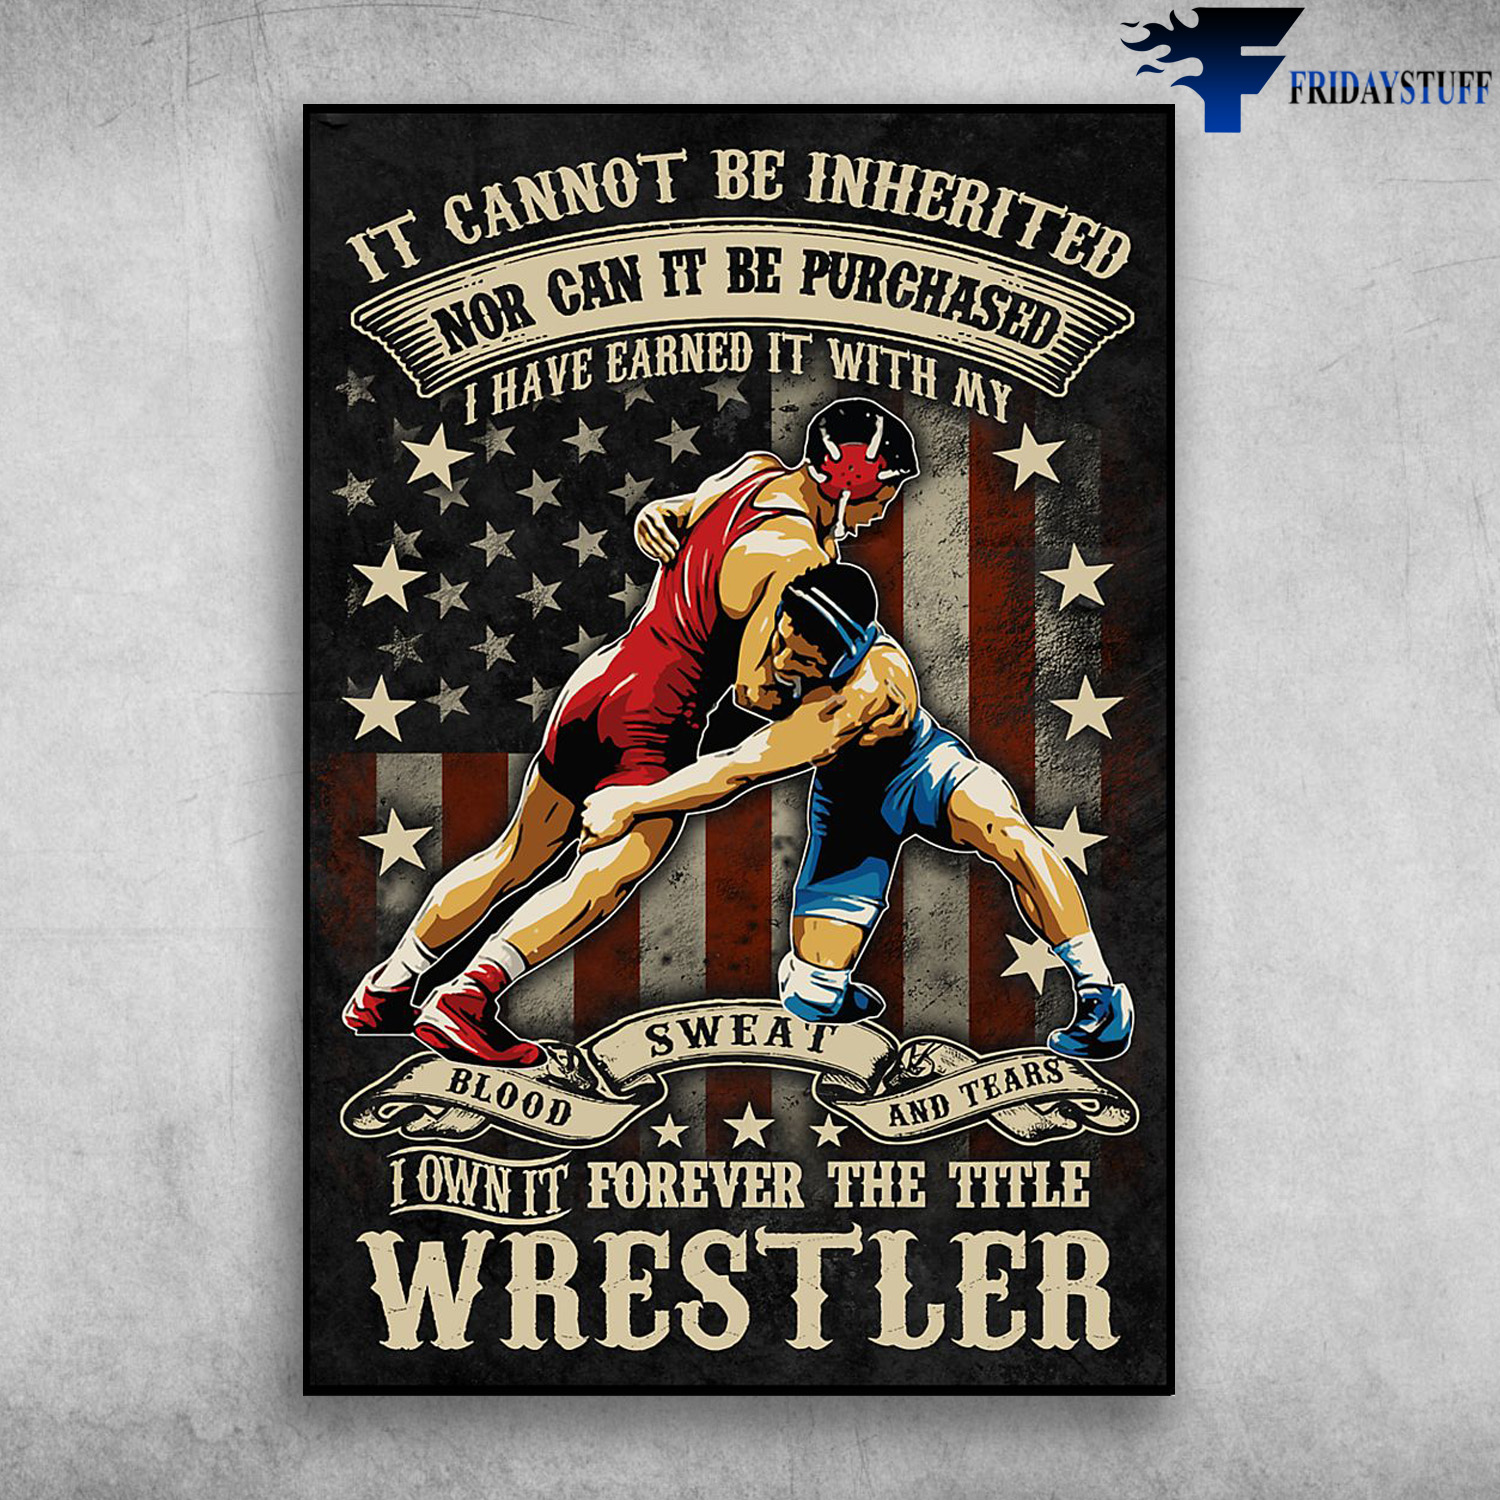 Wrestling Couple - It Cannot Be Inherited, Nor Can It Be Purchased, I Have Earned It With My Blood, Sweat, And Tears, I Own It Forever The Title Wrestler